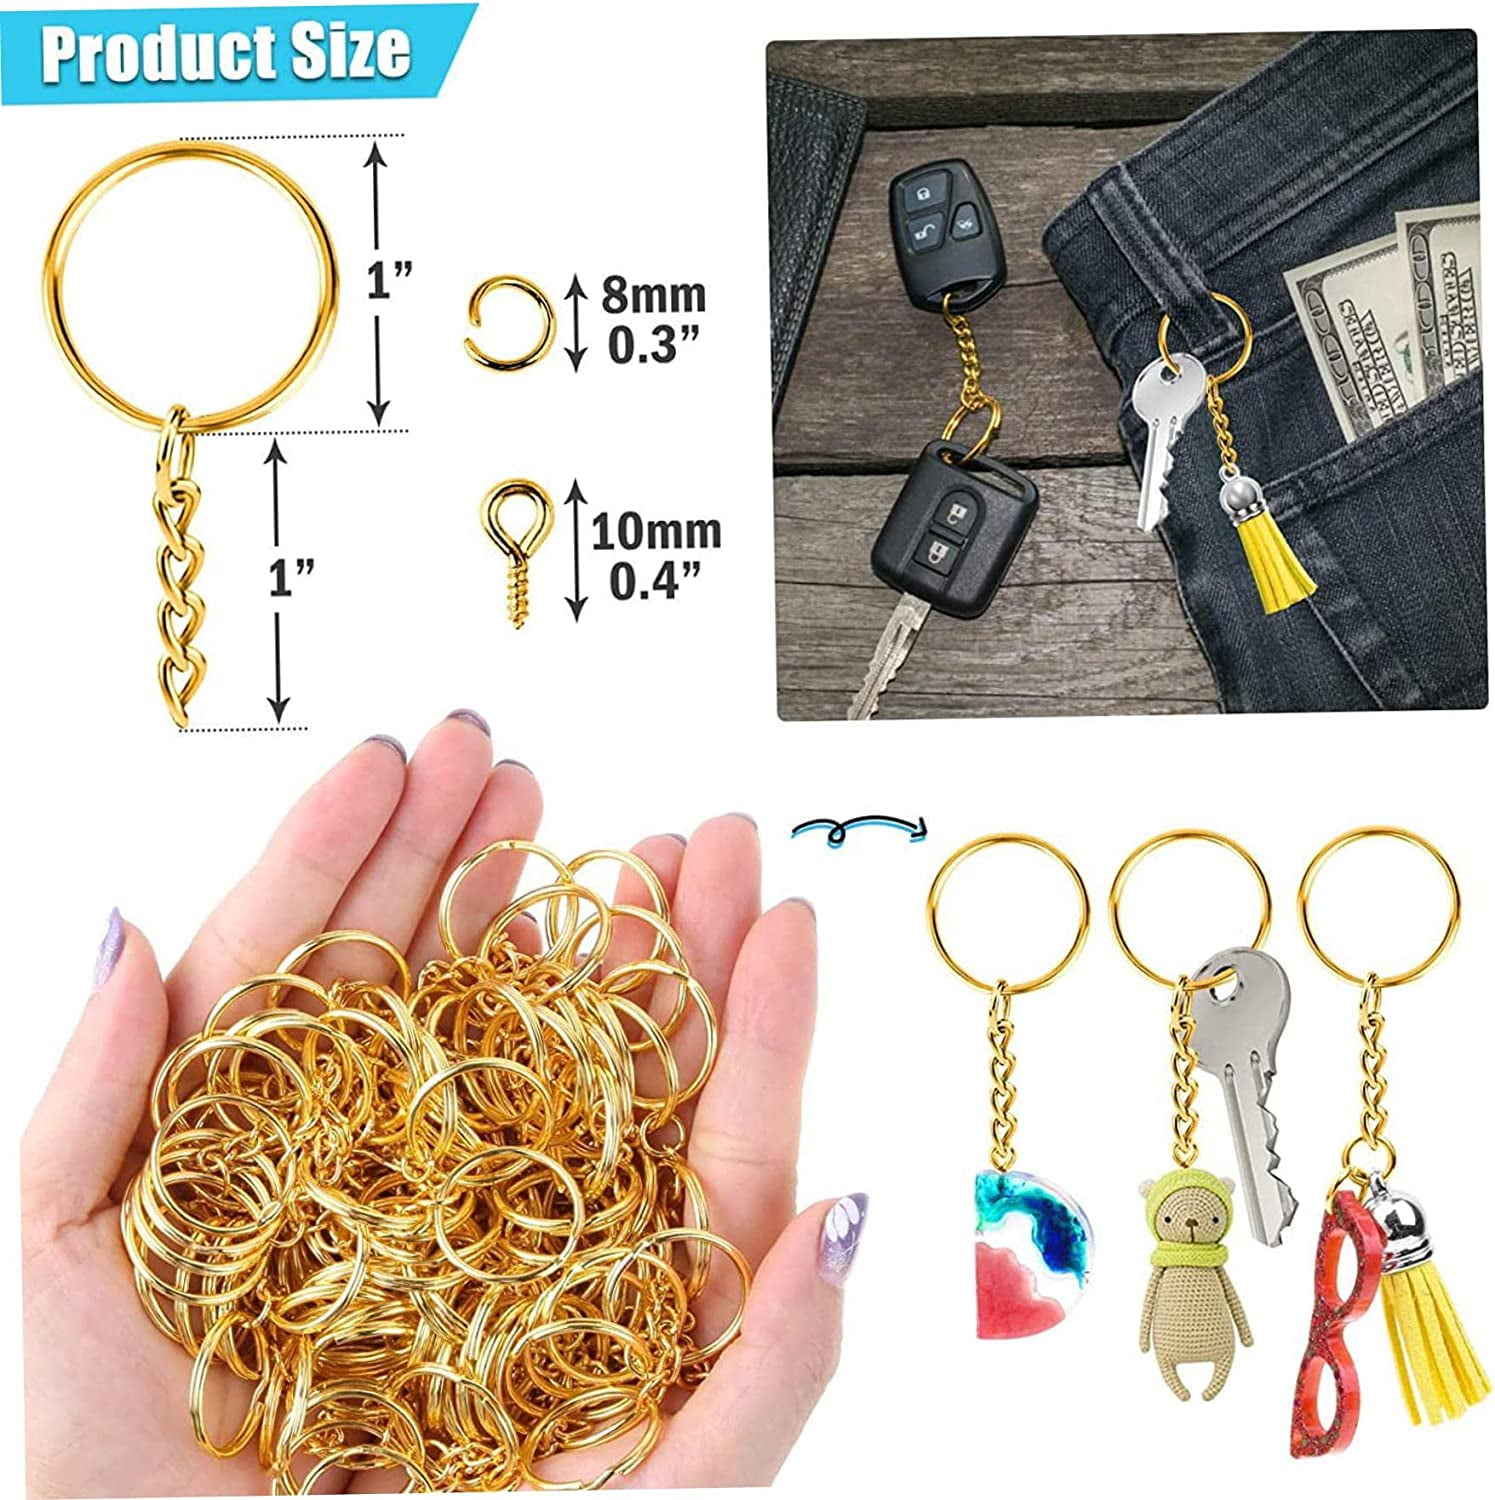 Keyring Hoops For Crafts, Resin Keychain, 30pcs Keychain Rings With Chains,  30pcs Jump Rings, 30pcs Eye Screws For Diy Keychain Making